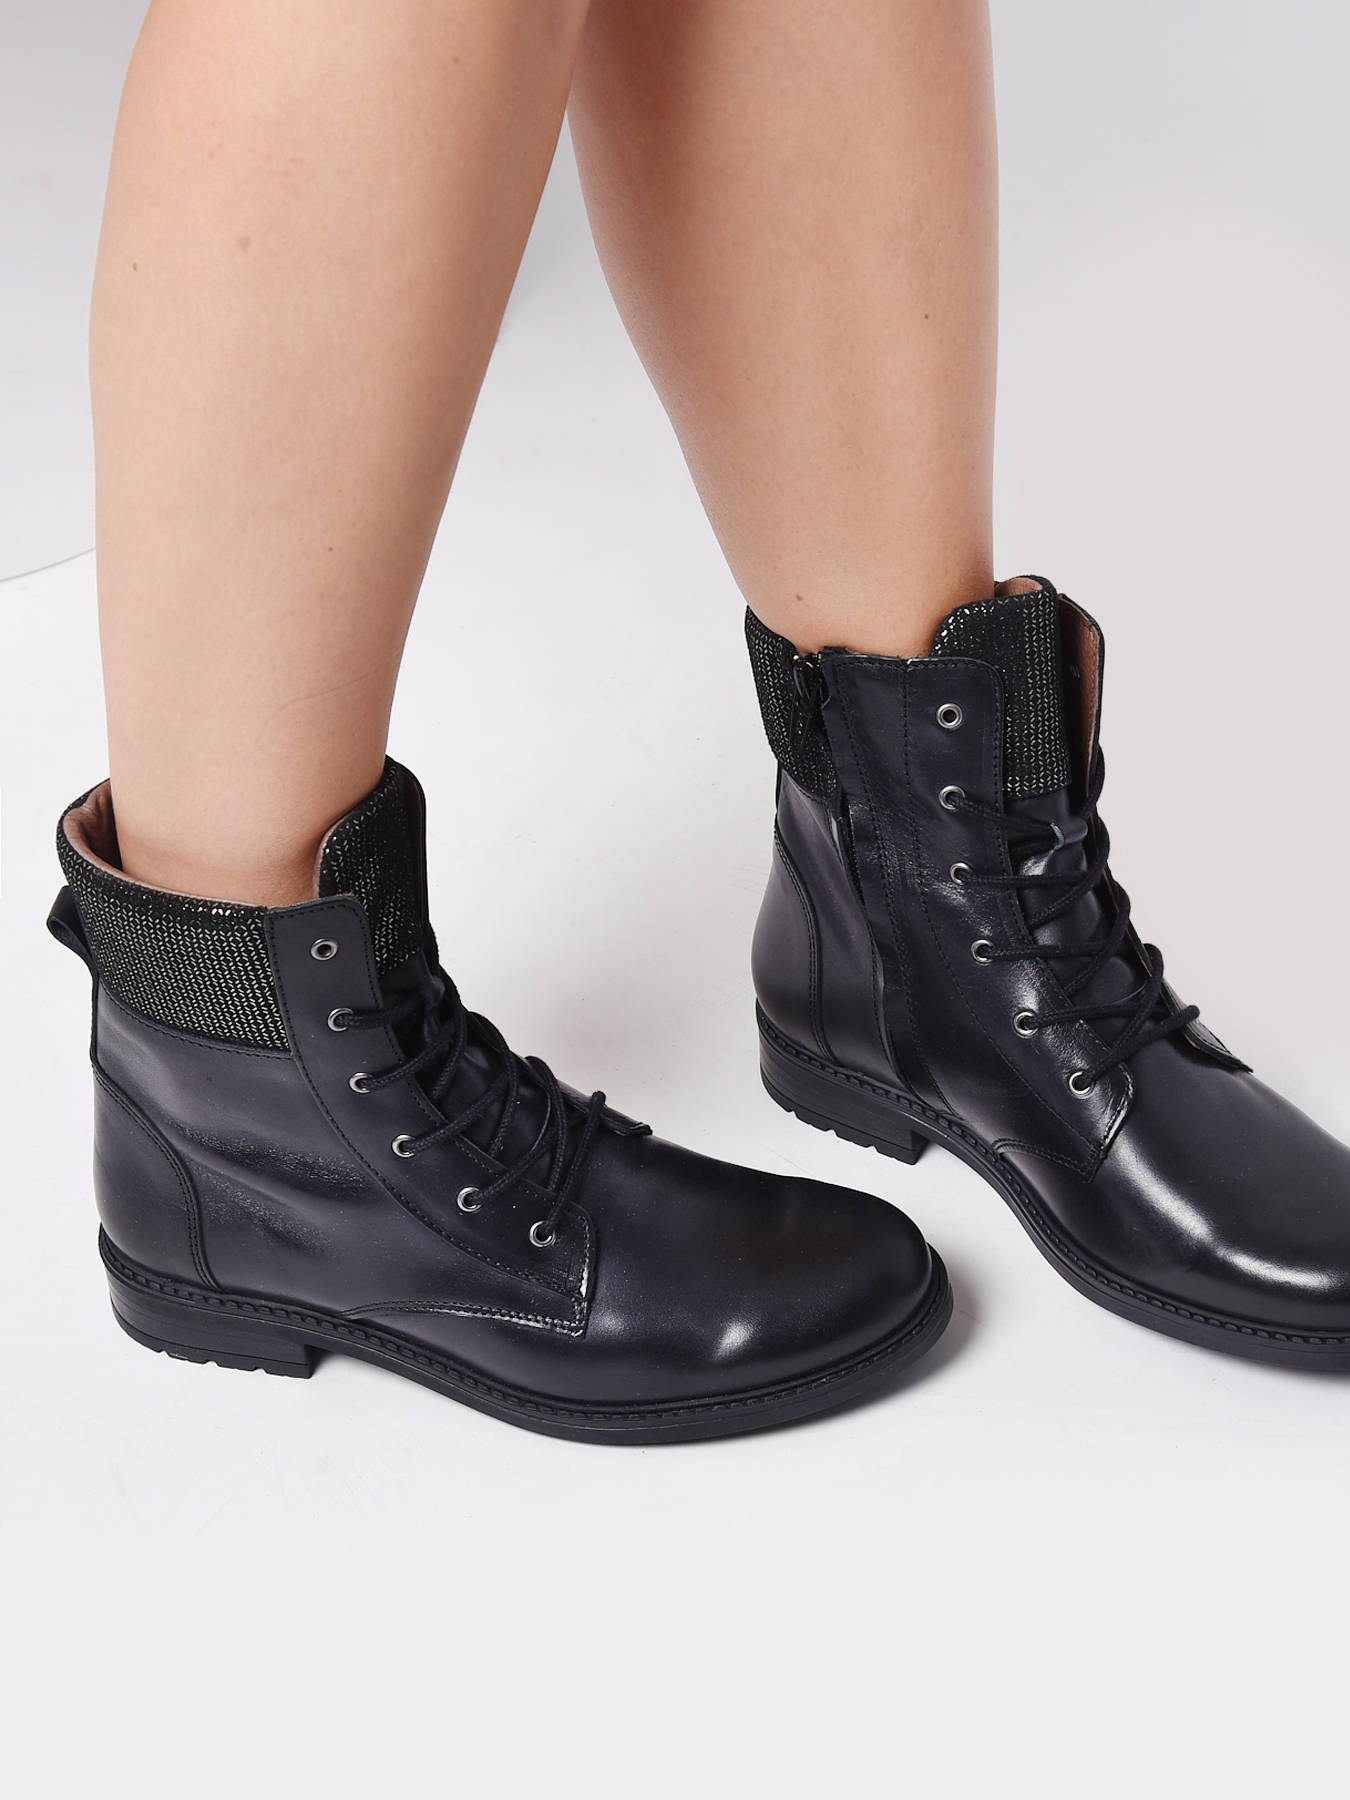 Bellamy Boots ELOISE - best prices